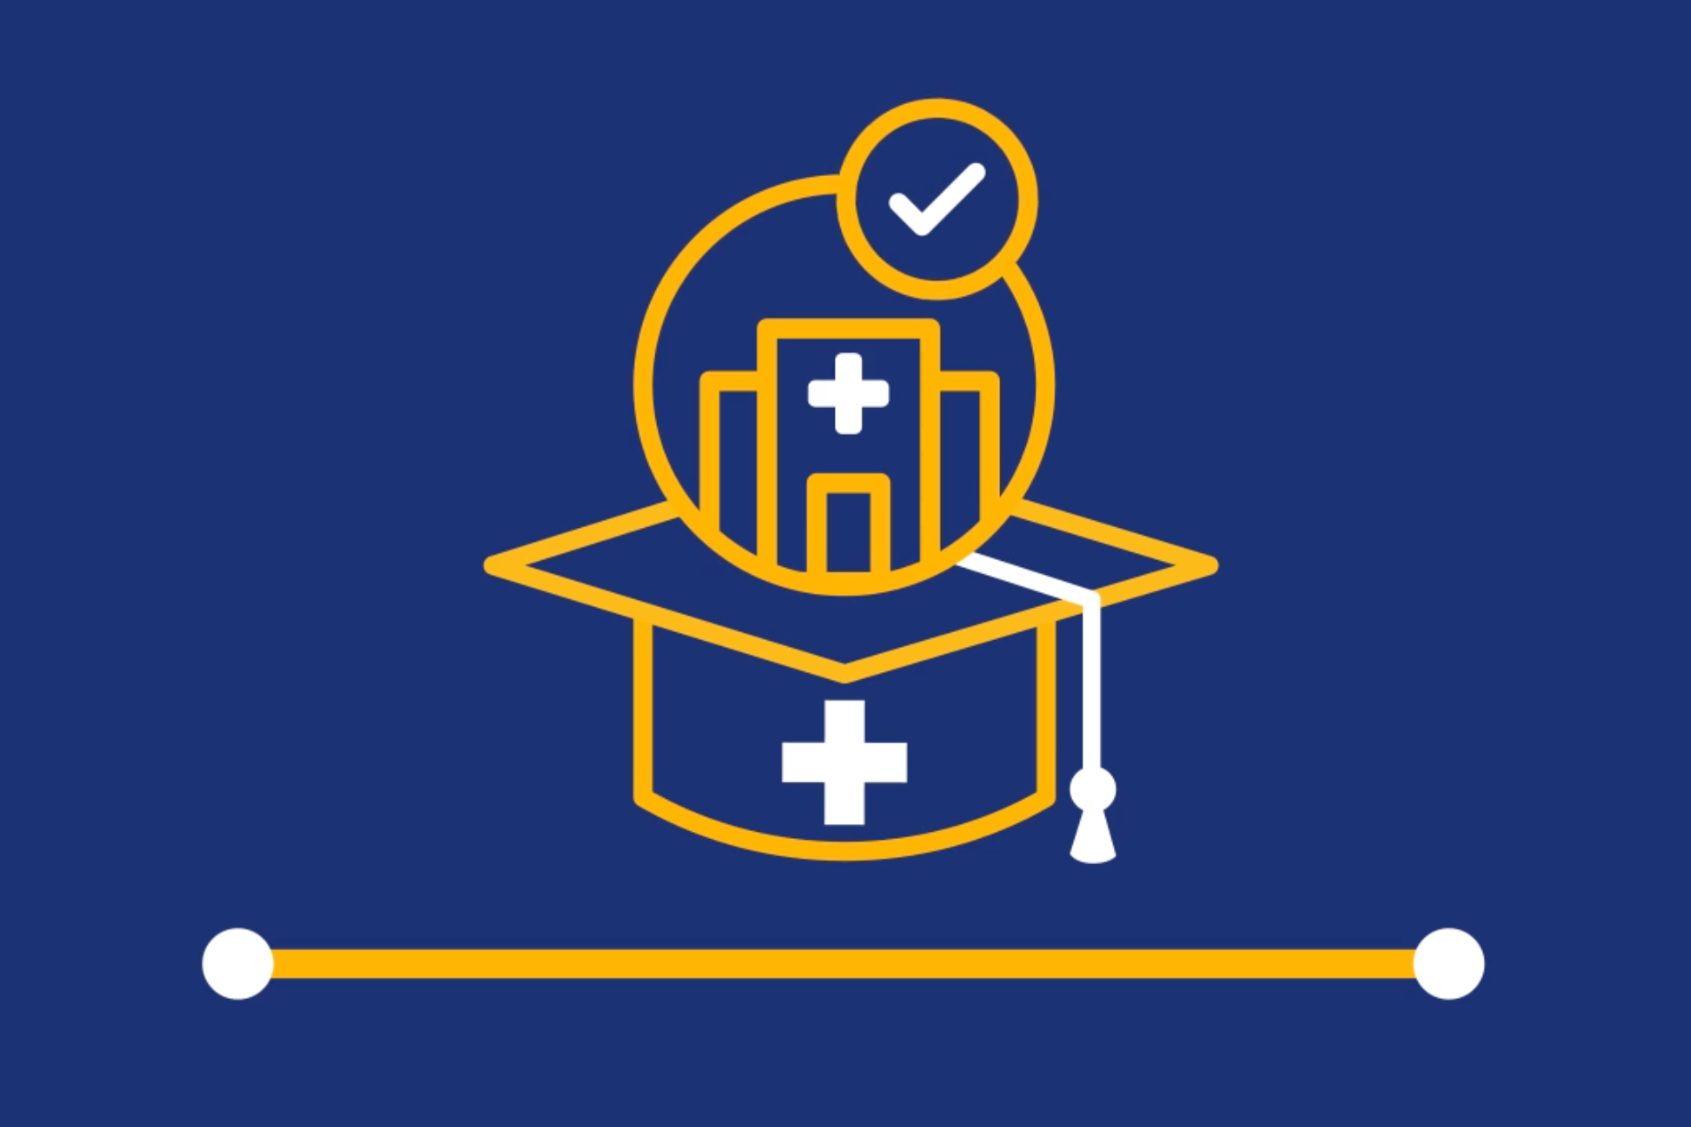 Icon with a mortarboard and a floating hospital image, depicting graduates entering medical school